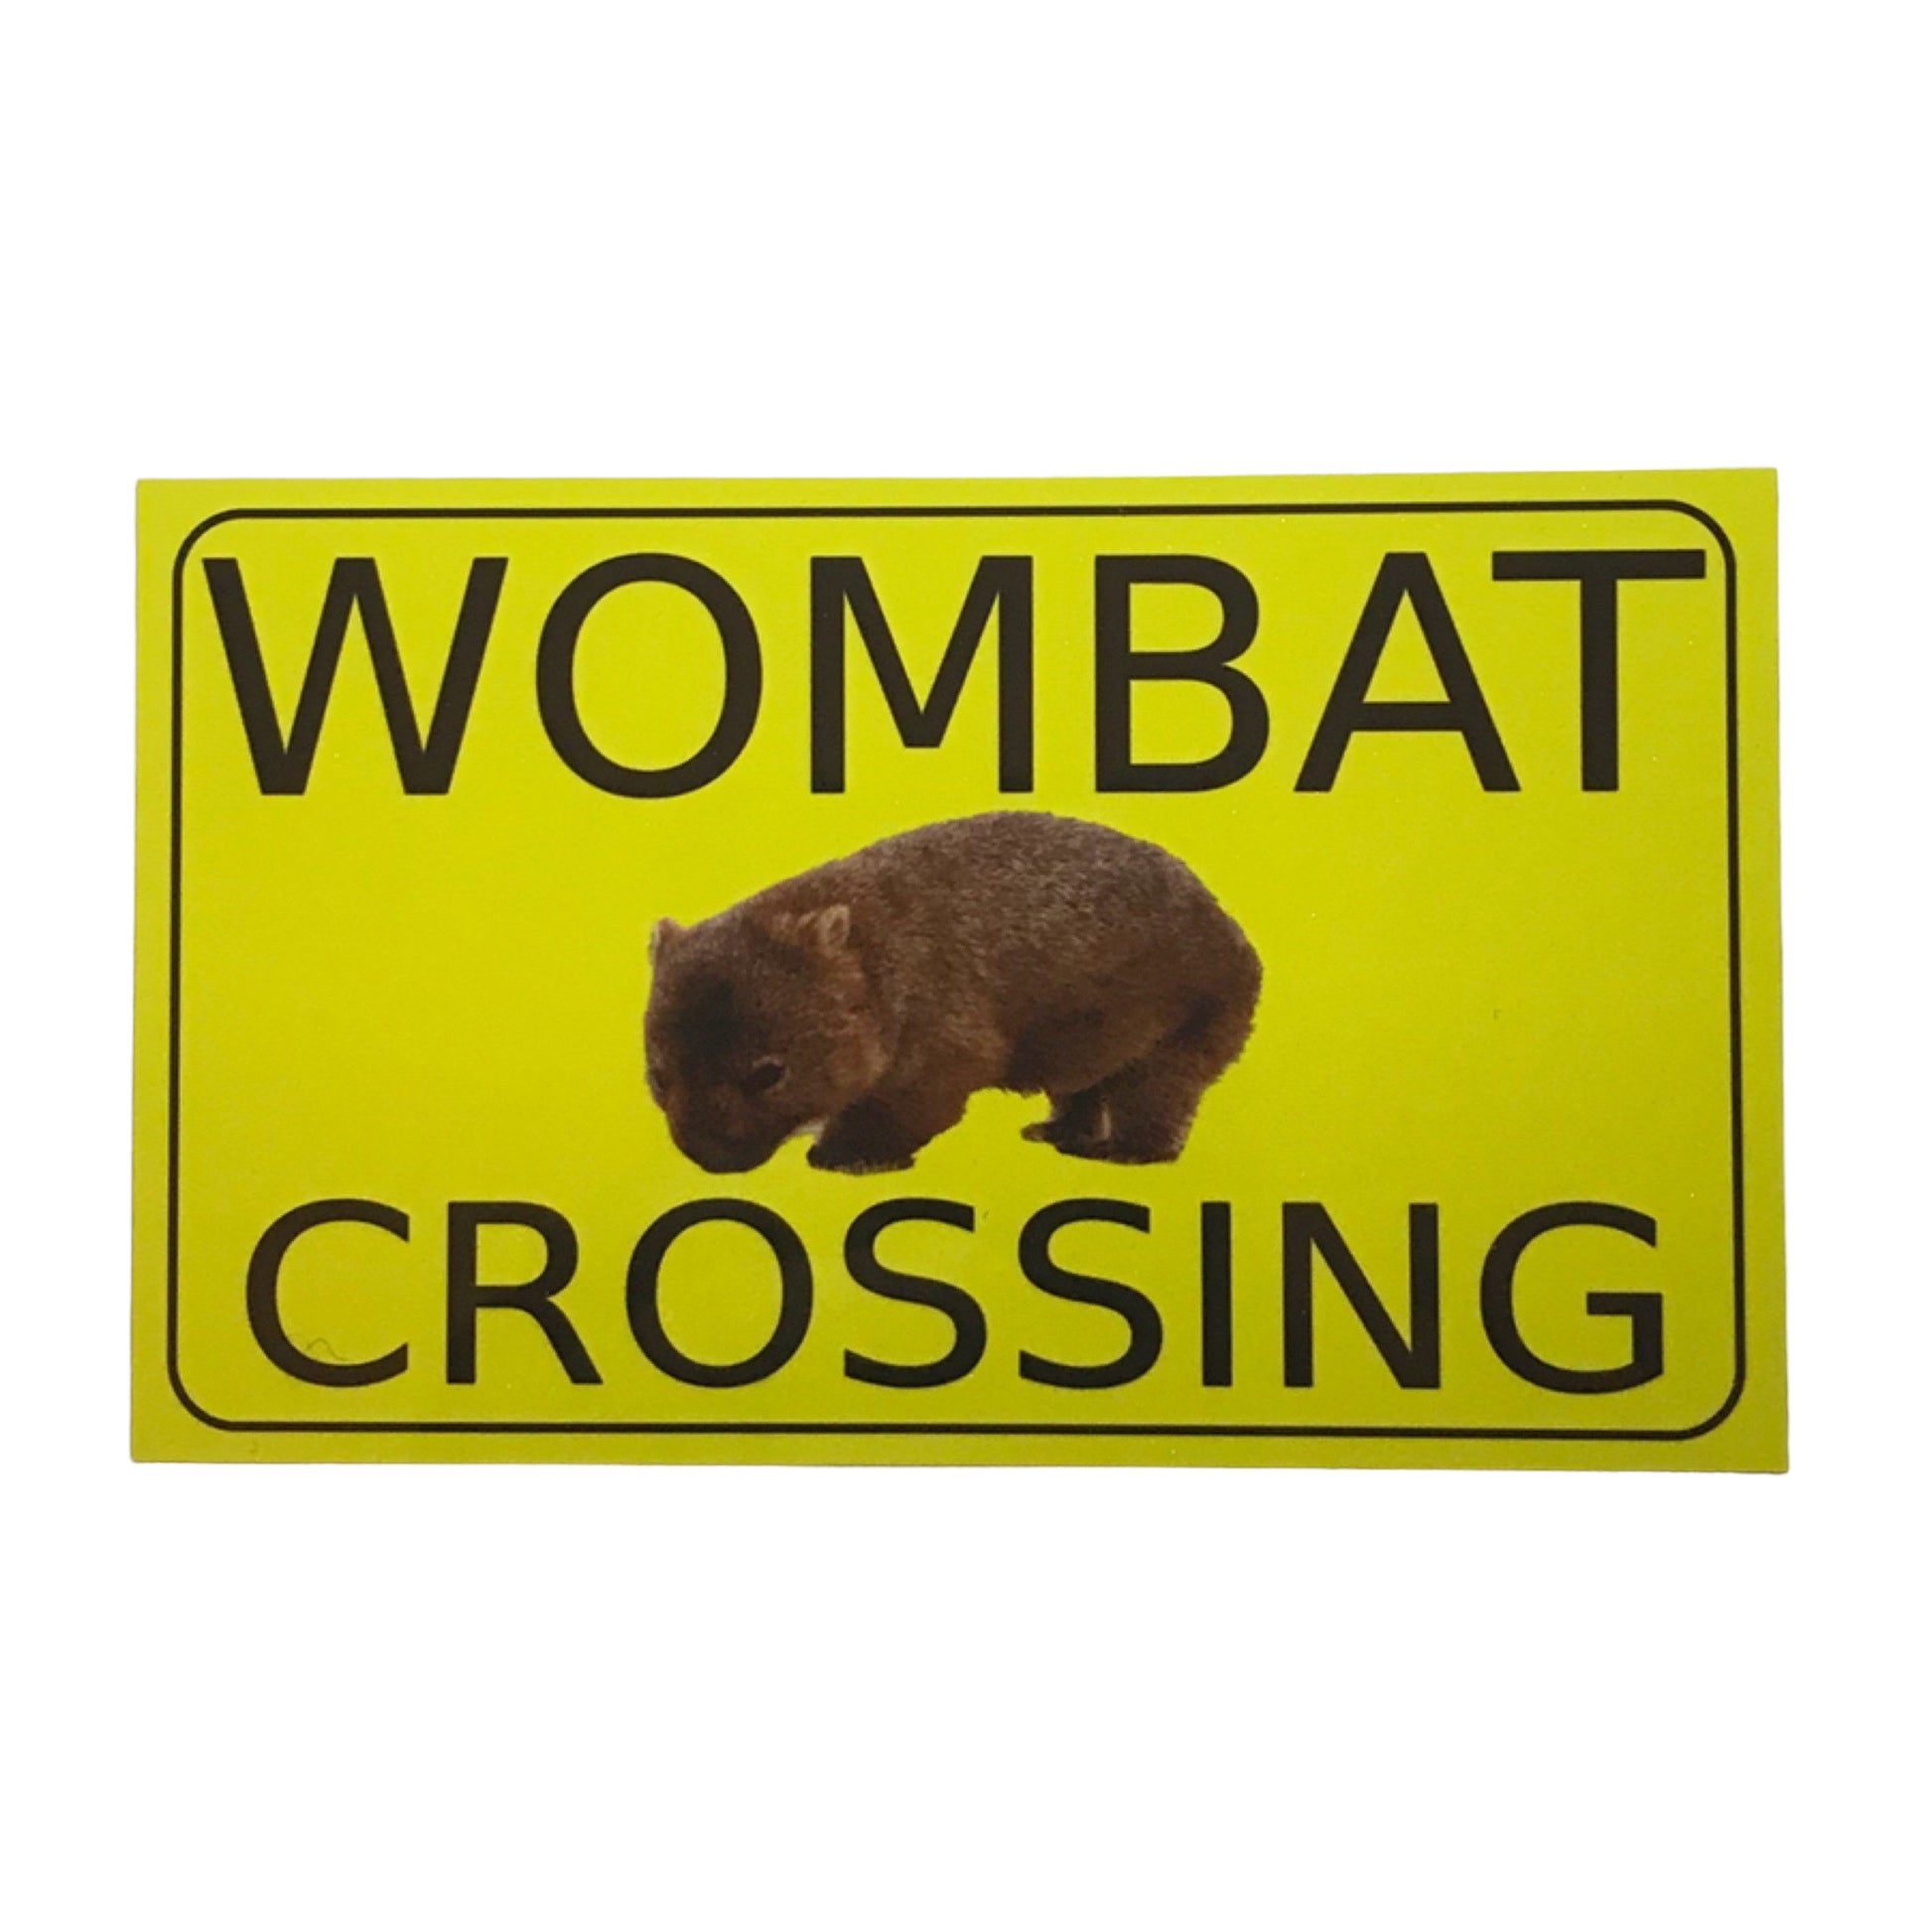 Wombat Crossing Sign - The Renmy Store Homewares & Gifts 